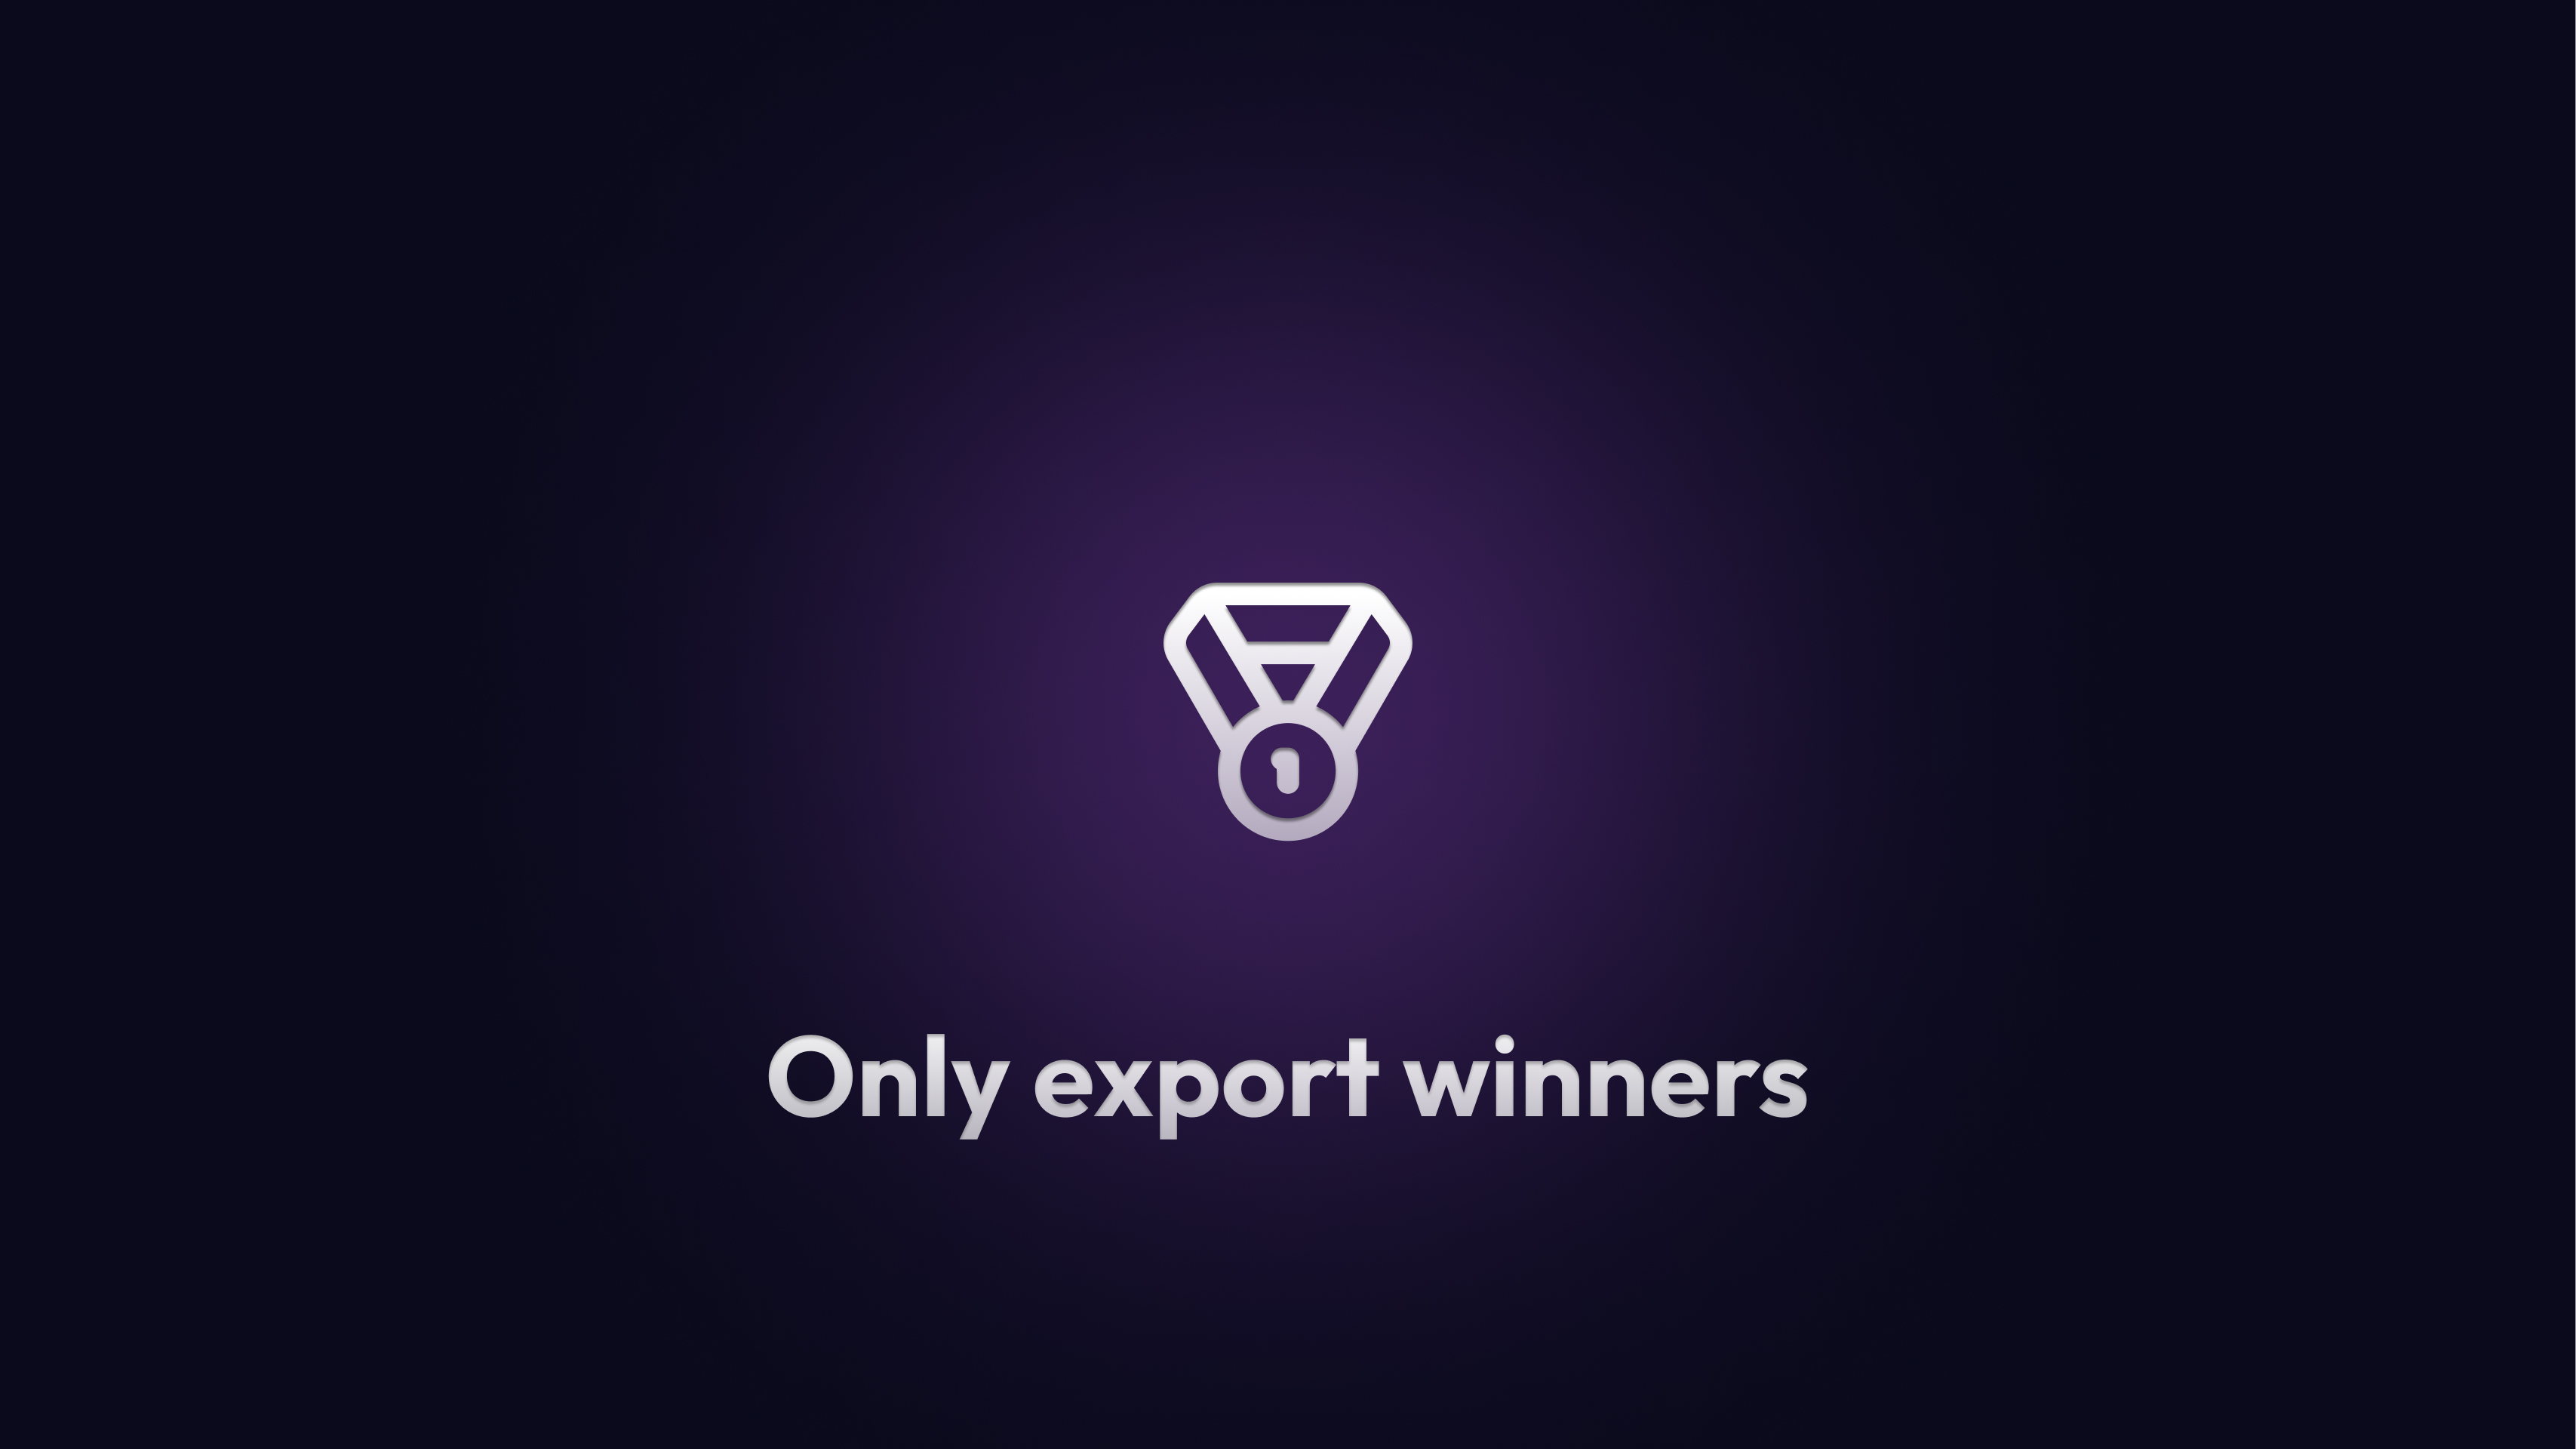 Cover Image for Only export winners